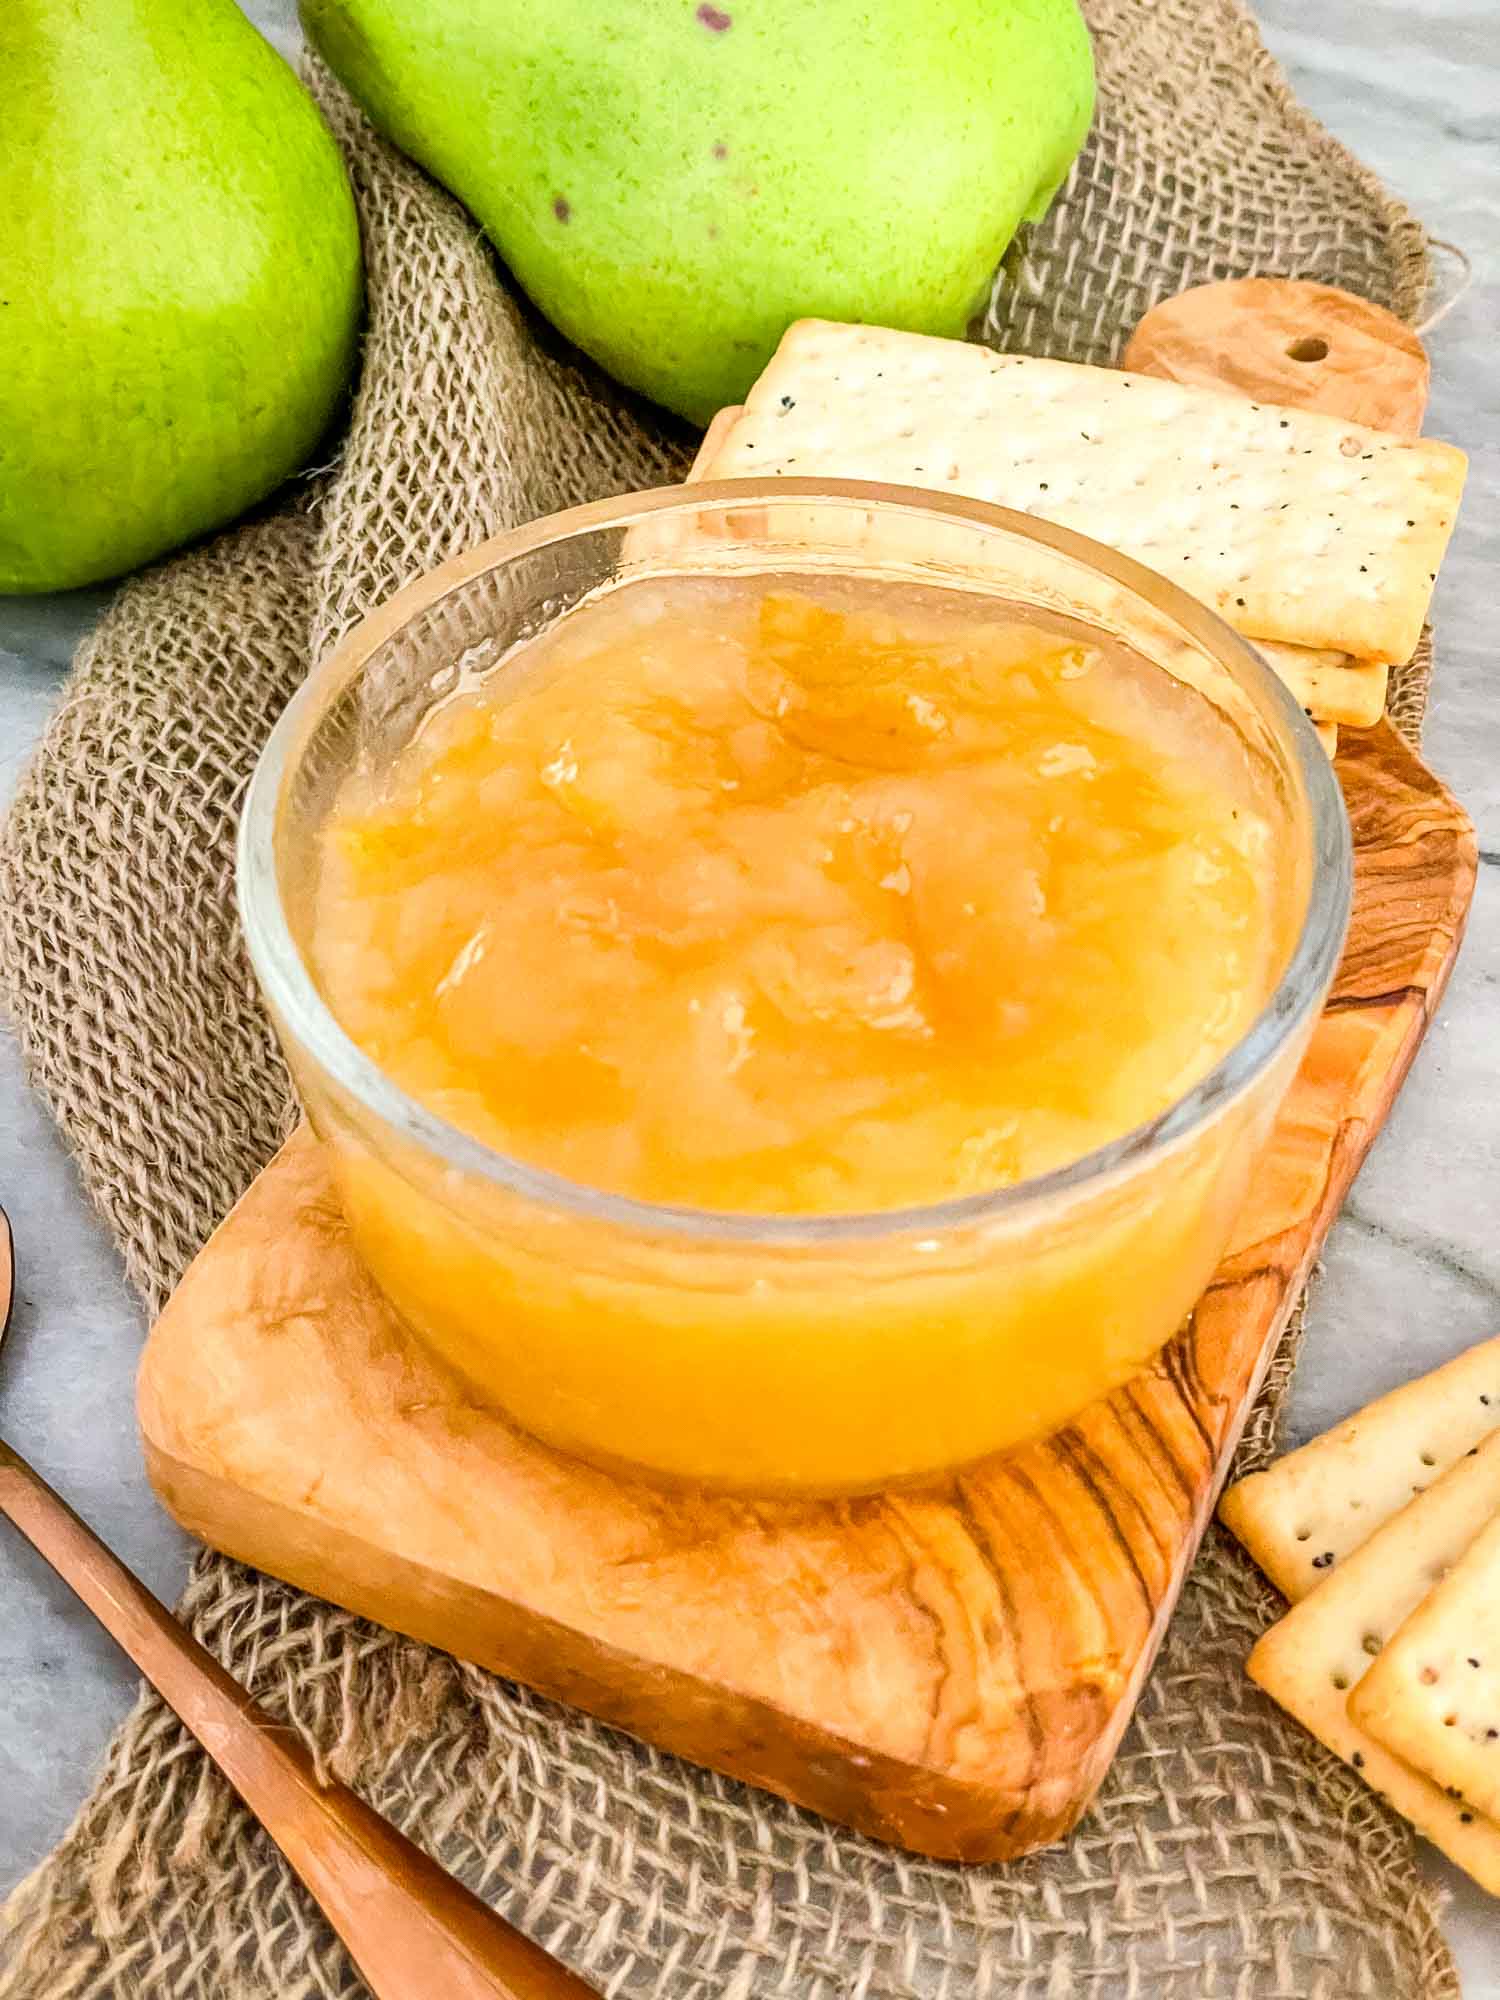 Pear Jam in a clear bowl sitting on wood